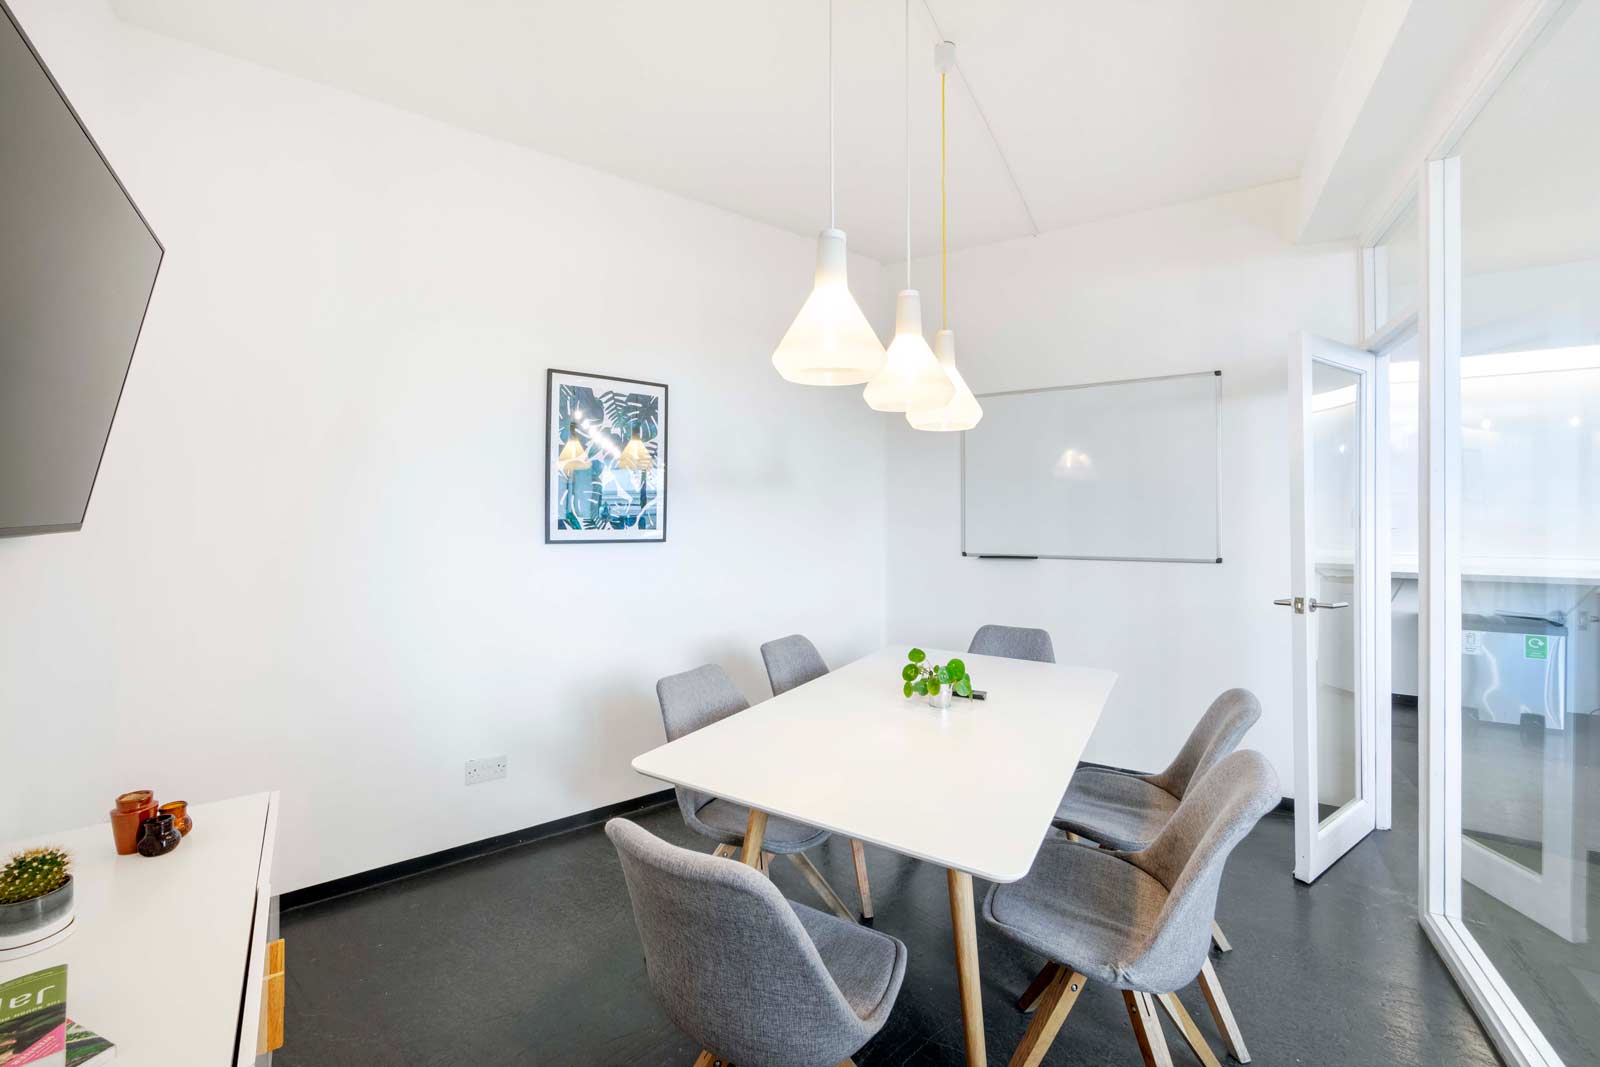 Offices with break out areas and meeting rooms in London